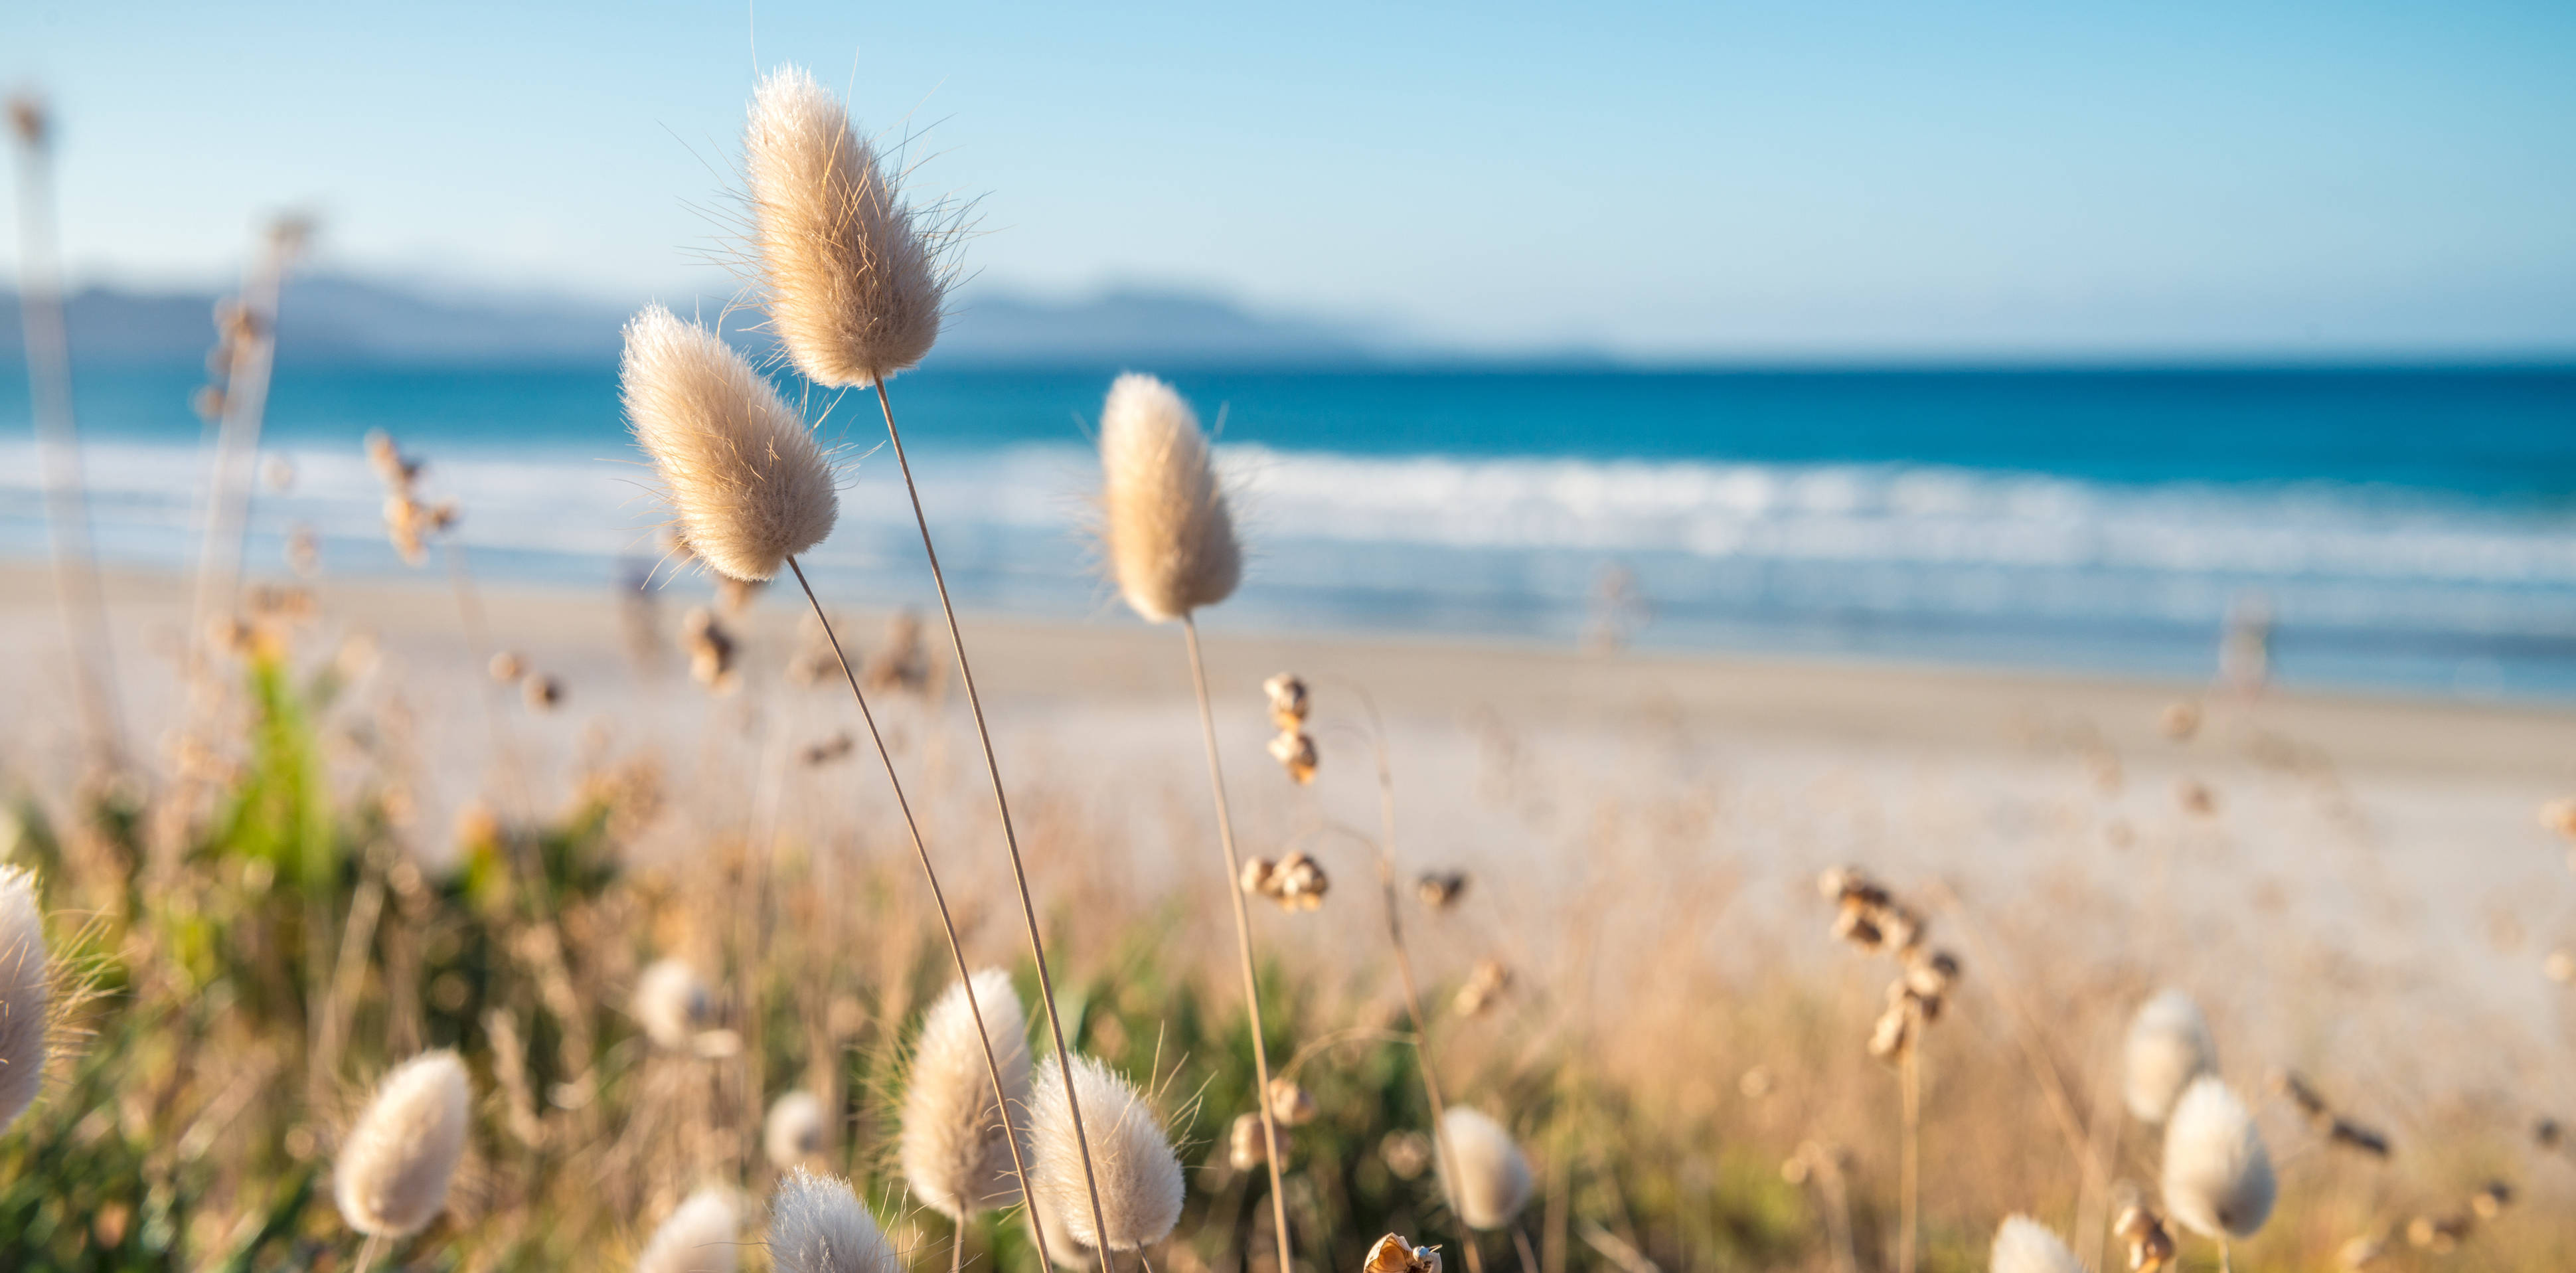 A plant with defocussed beach and ocean in the background.